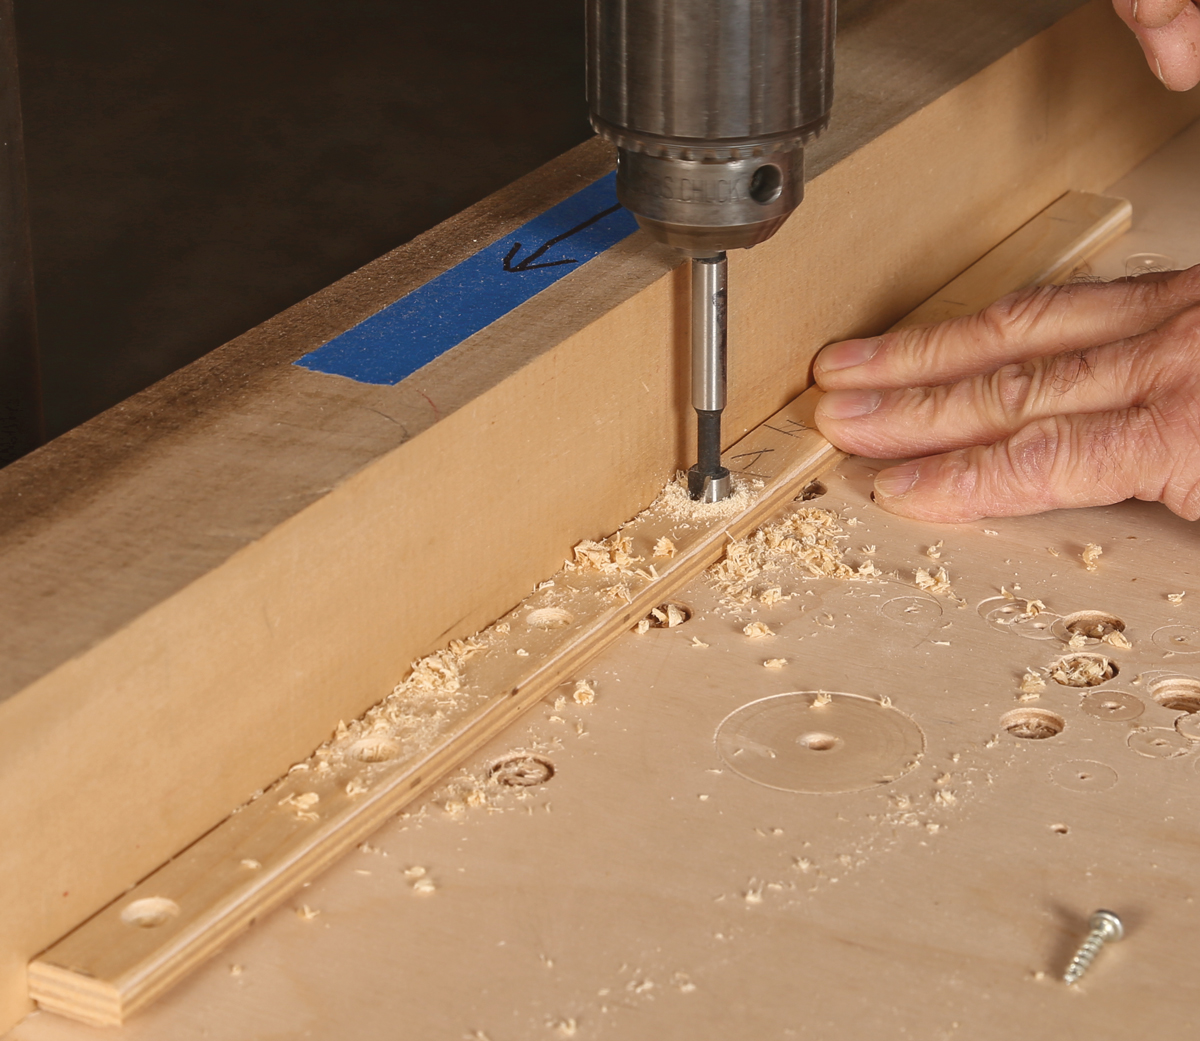 Prep the runners for screws. At the drill press, add a counterbore with a Forstner bit, and finish with a 1⁄8-in. bit as a pilot hole as well as a clearance hole.